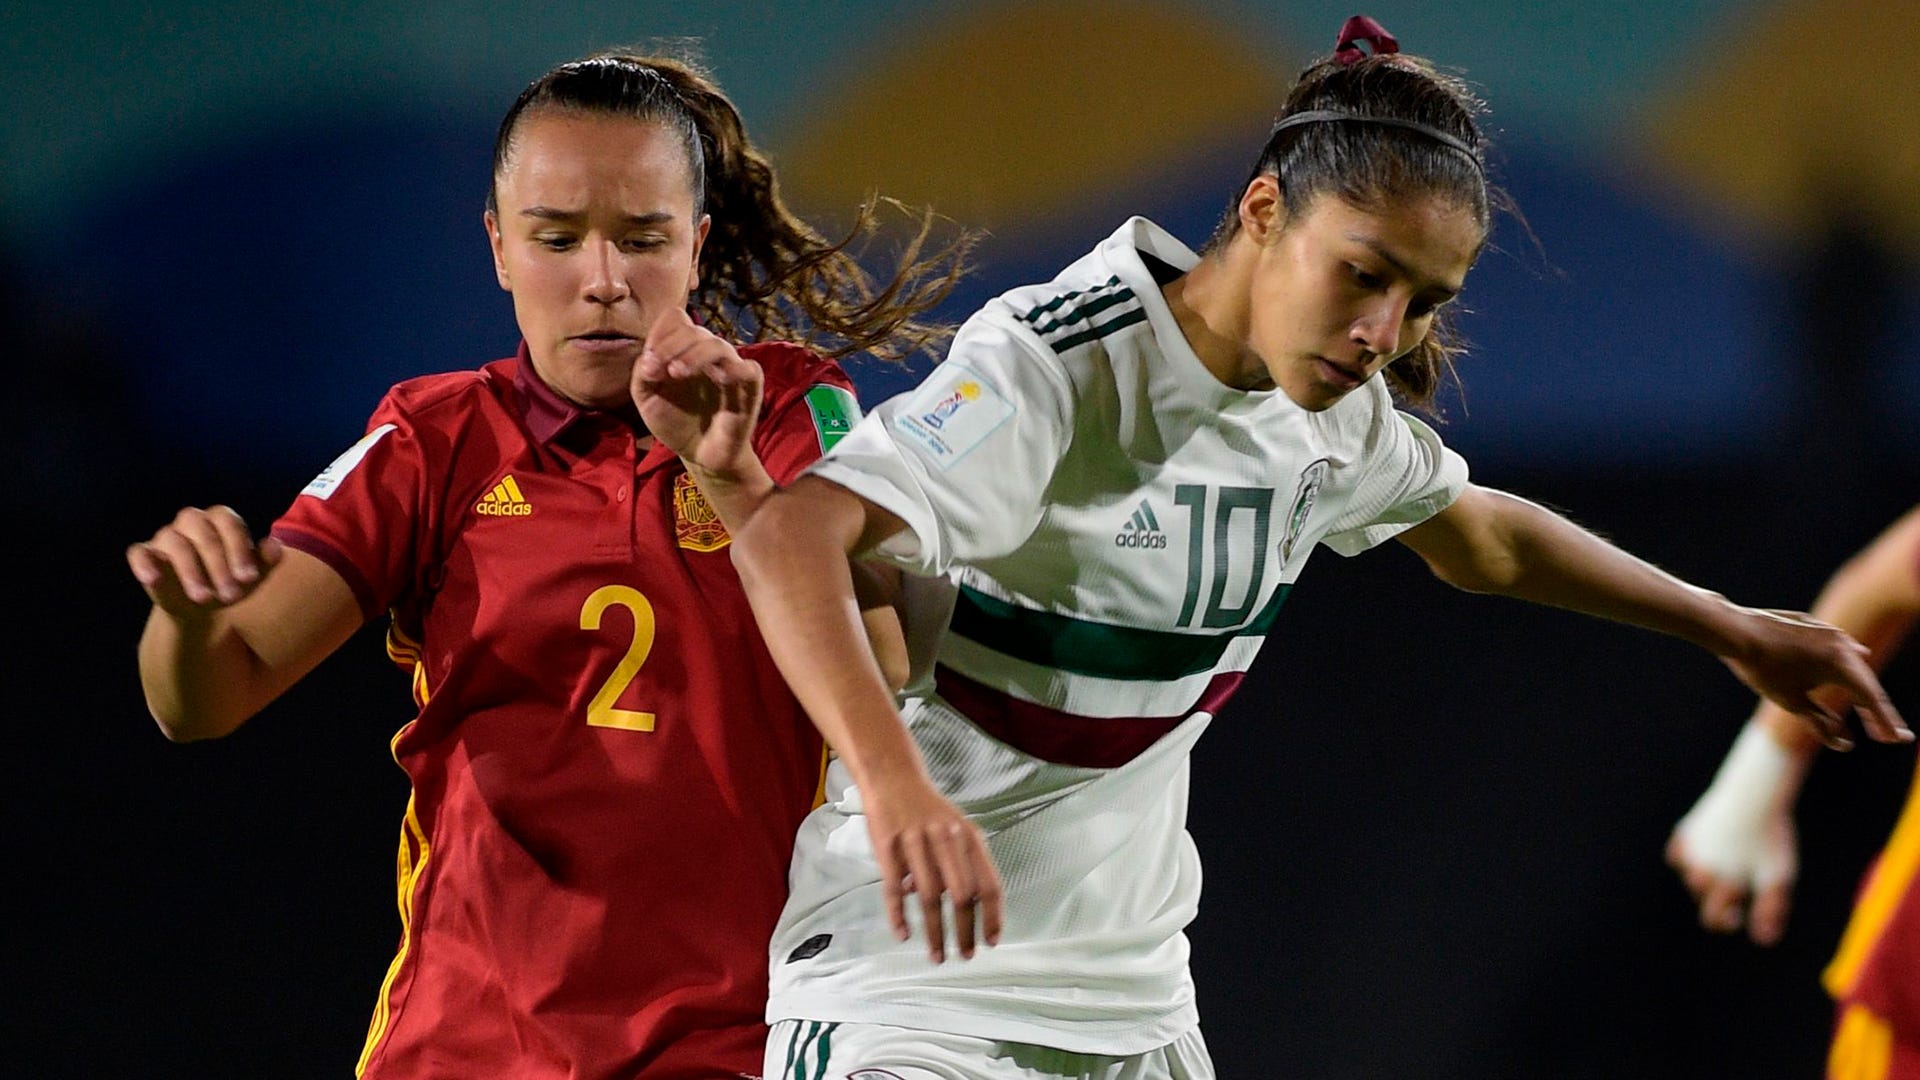 The happy exiles: why US women's soccer stars choose to play abroad, Women's football